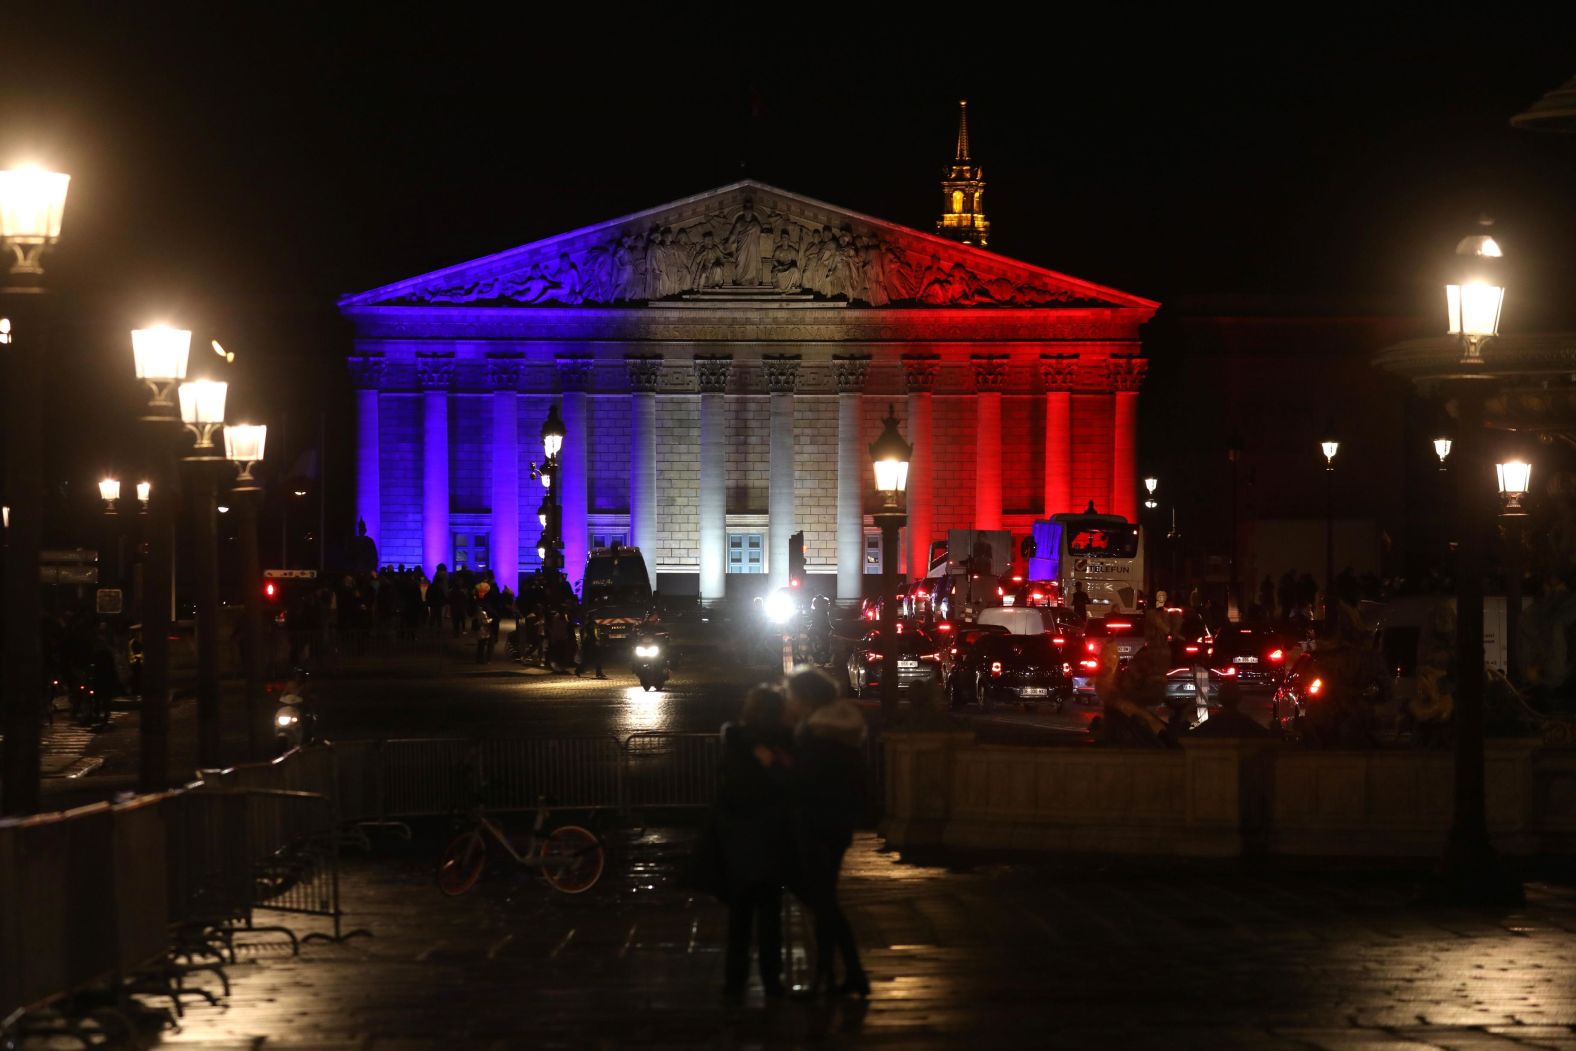 The National Assembly in Paris is illuminated in the colors of the French flag on November 10 as part of commemorations marking the 100th anniversary of the armistice ending World War I.